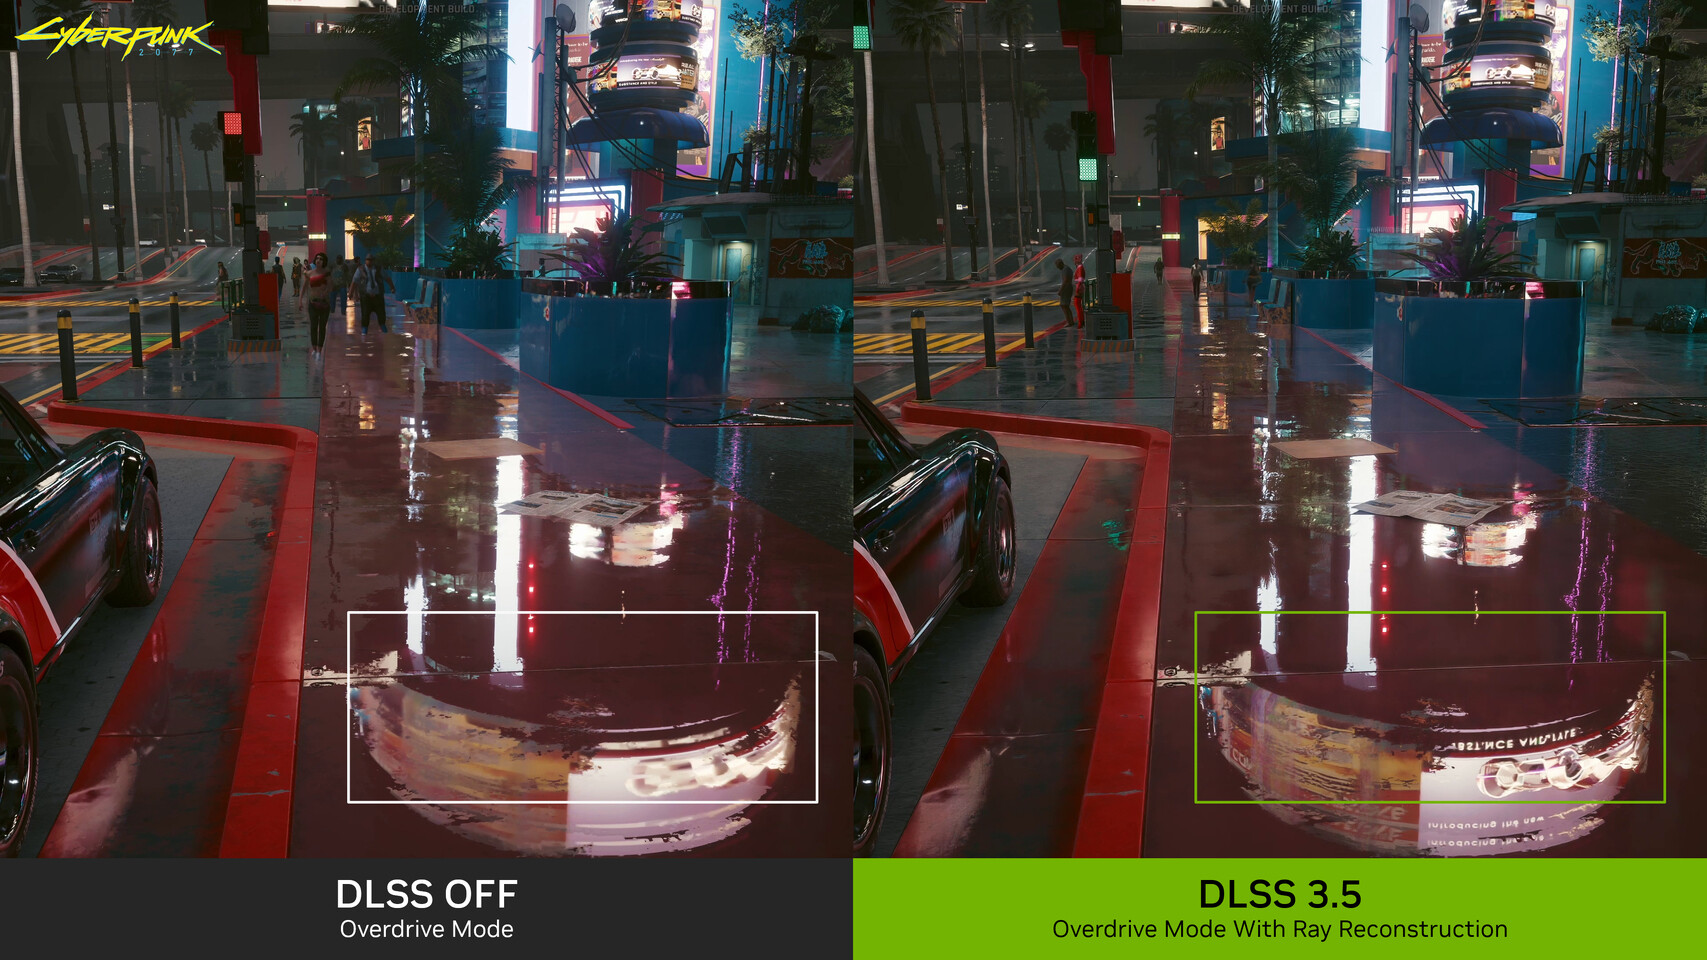 Ray Tracing ON vs OFF // Graphics Comparison #1 